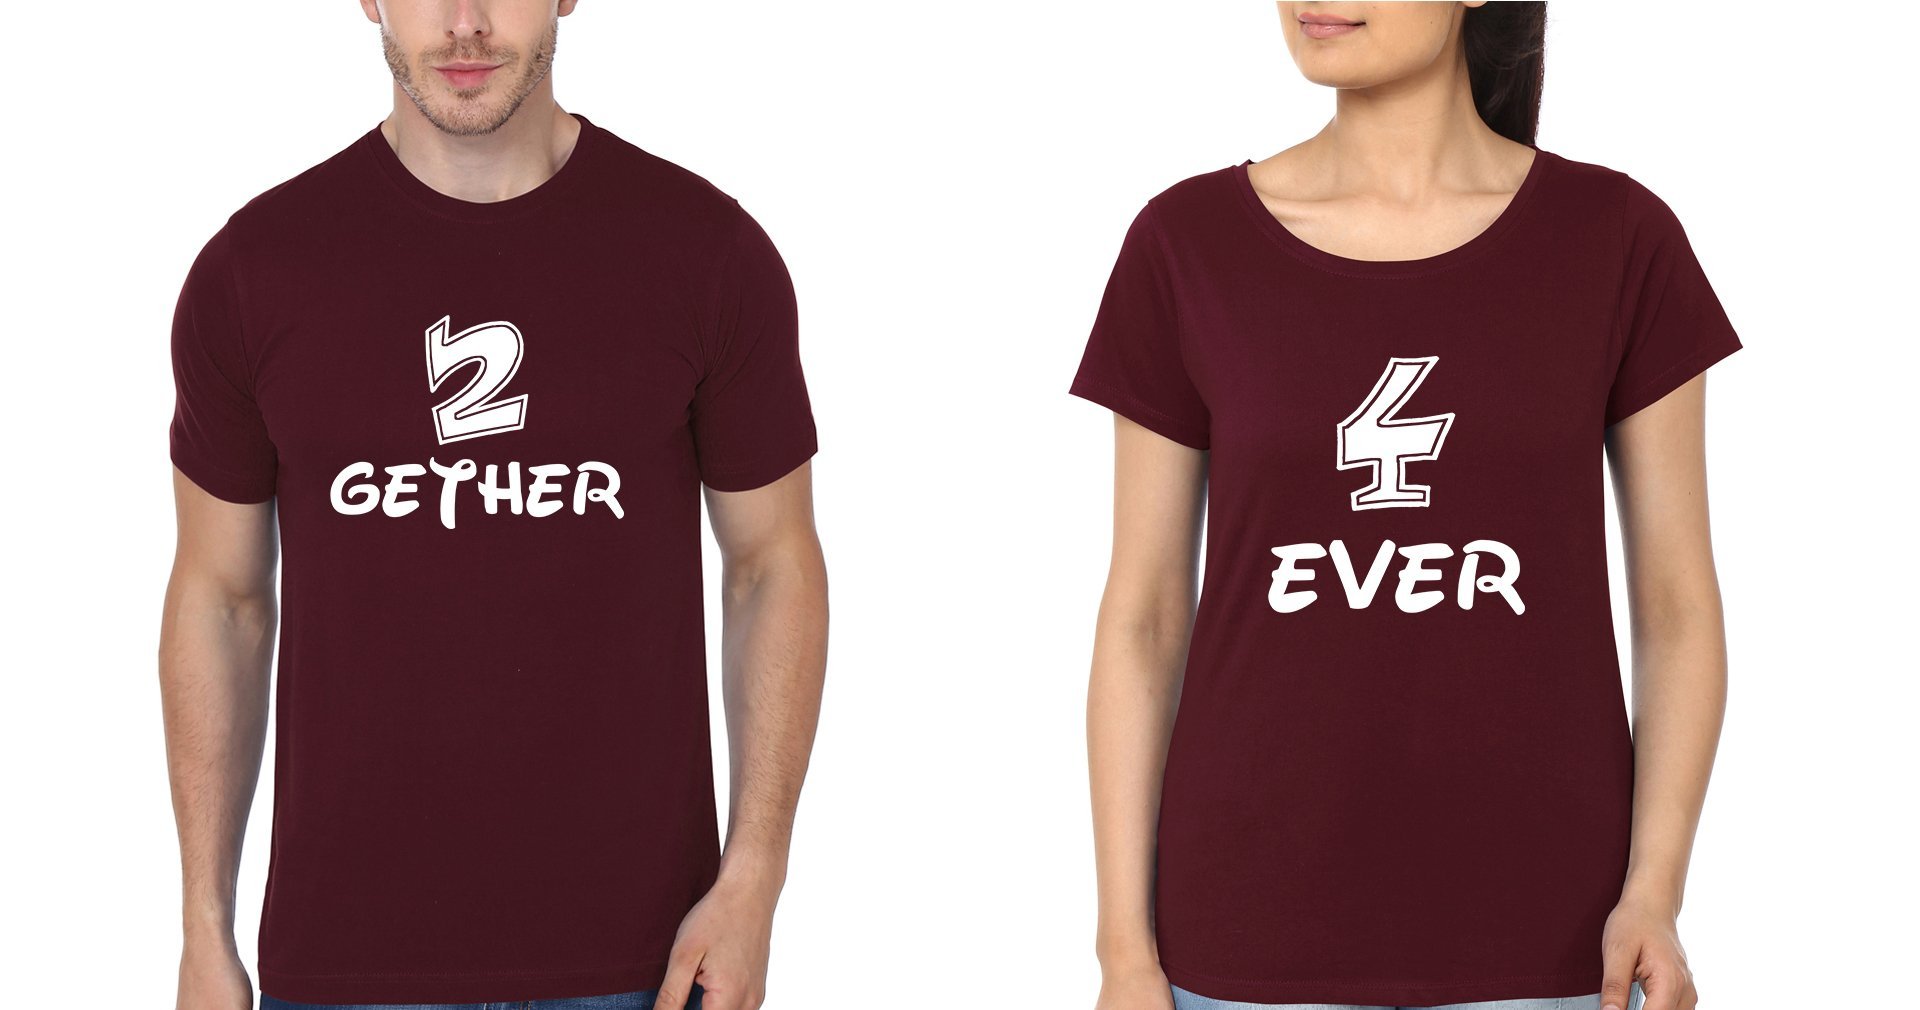 2gether 4ever Couple Half Sleeves T-Shirts -FunkyTees - Funky Tees Club